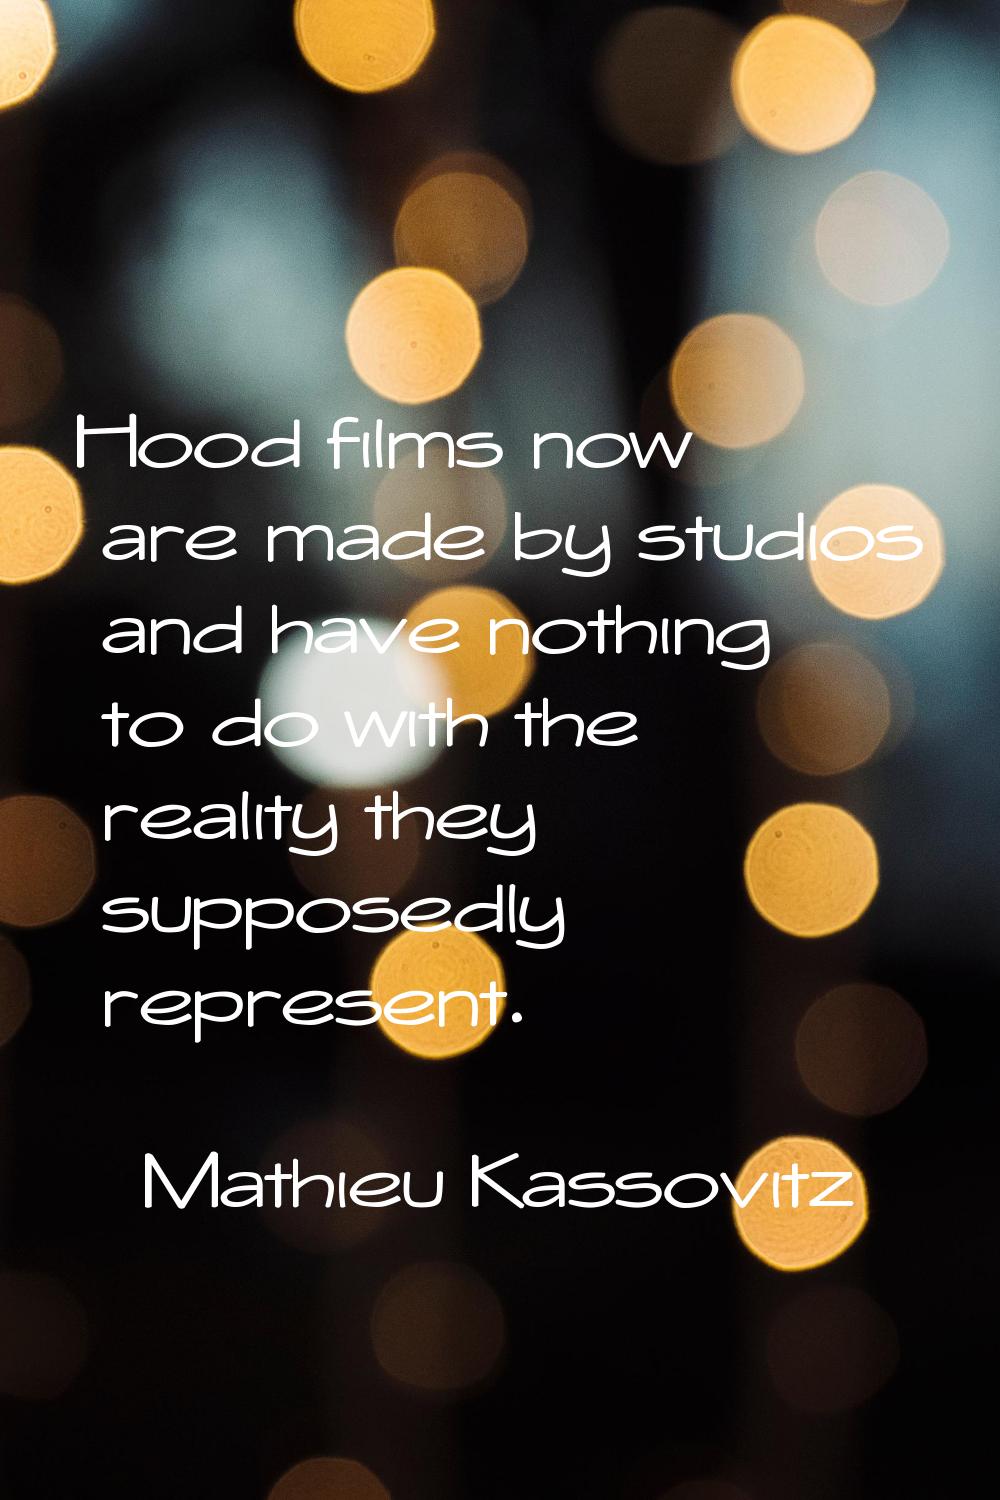 Hood films now are made by studios and have nothing to do with the reality they supposedly represen